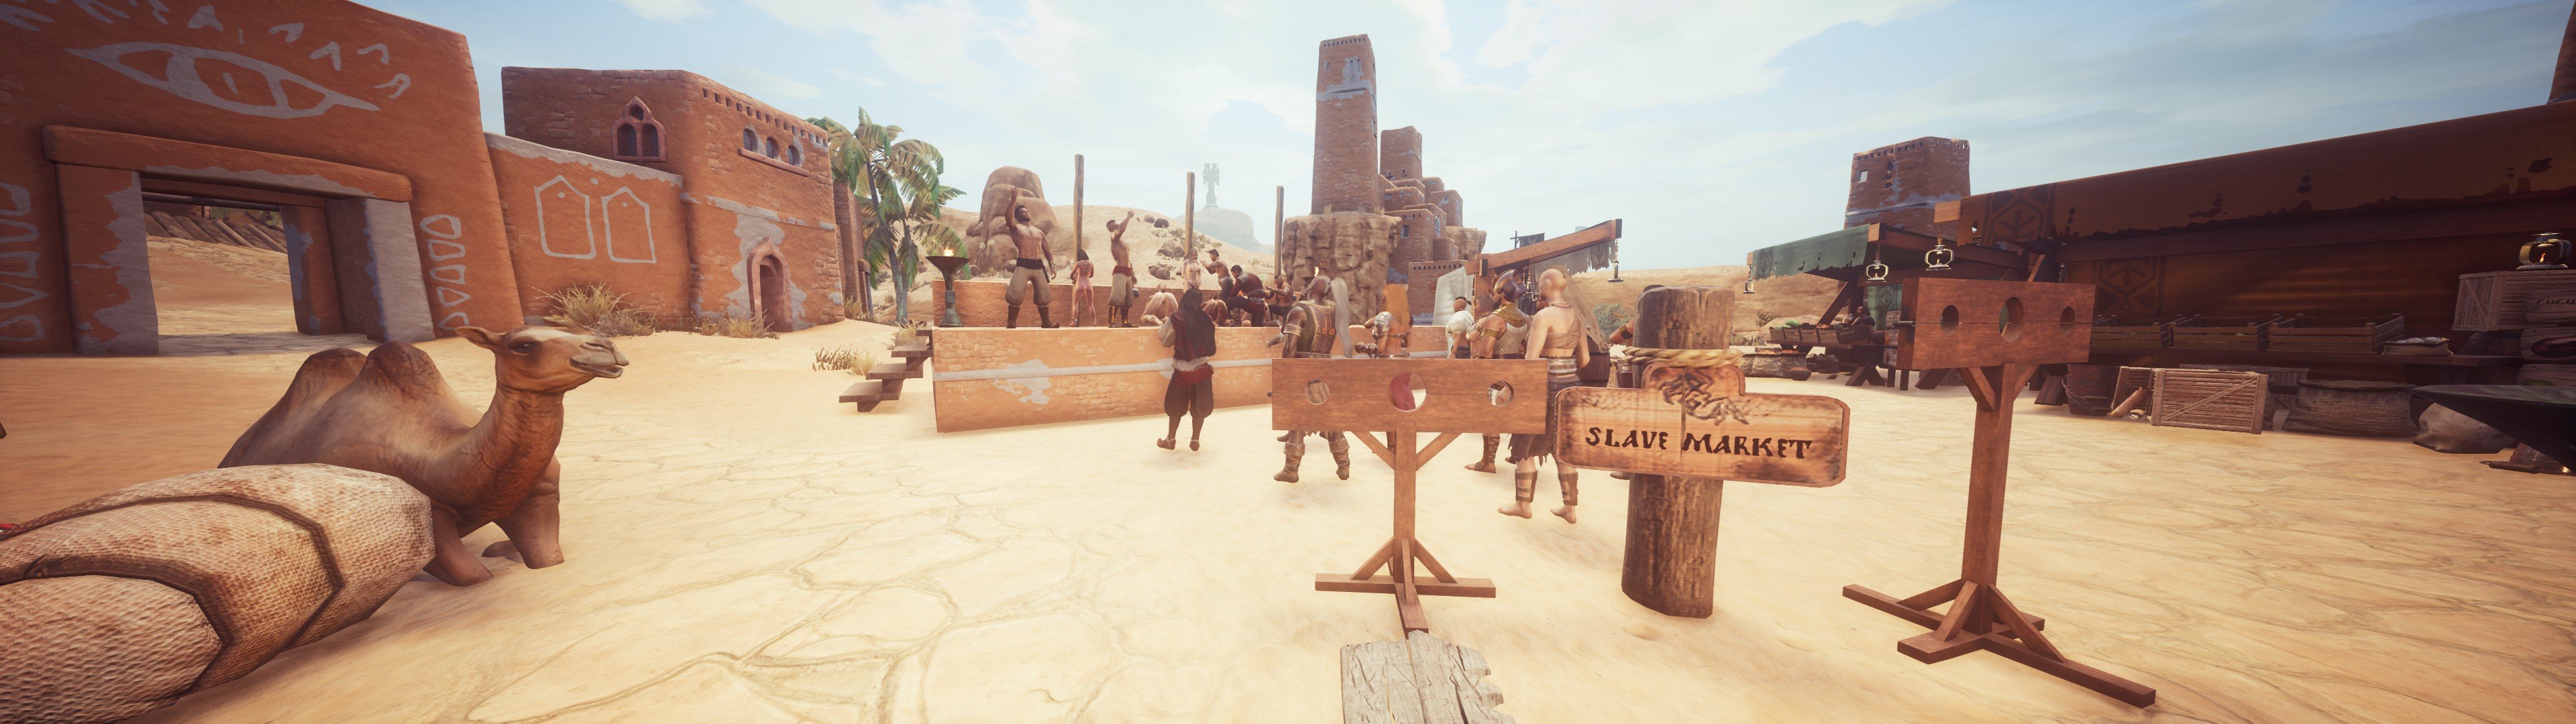 Outdated CE Conan Exiles Outdated Page 5Gaming. 